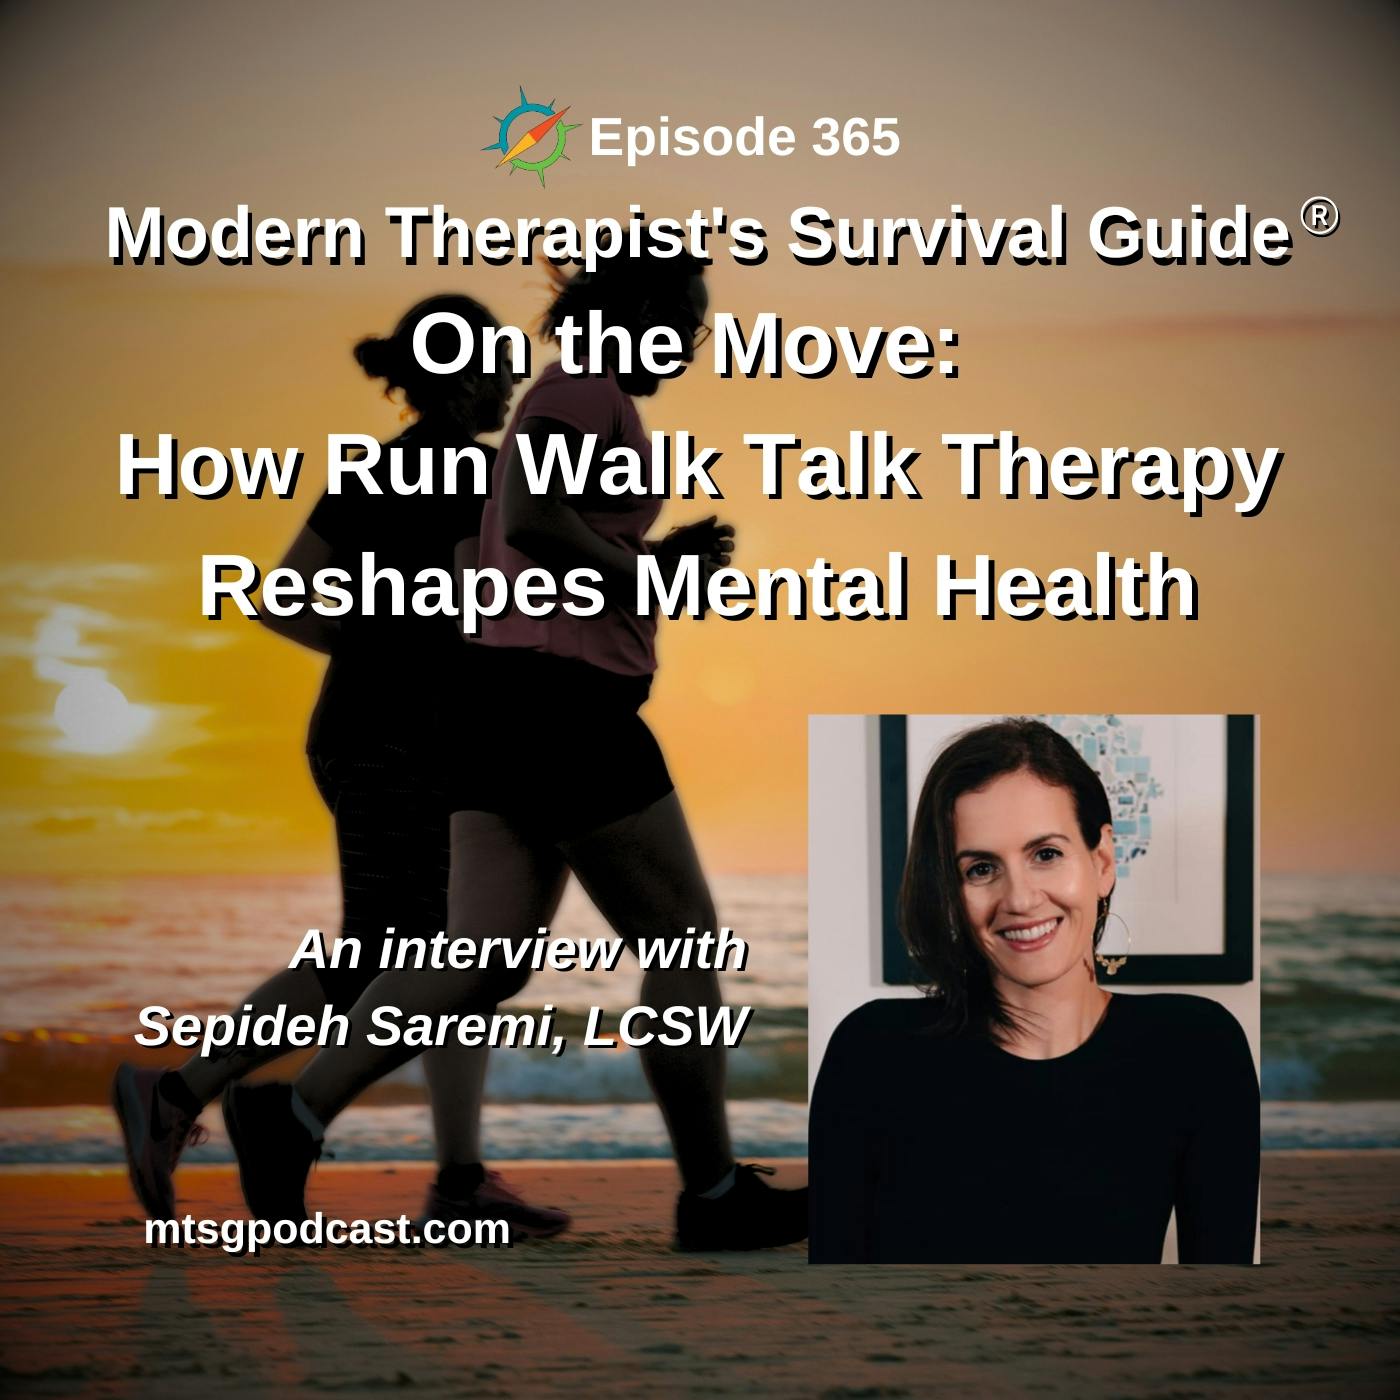 On The Move: How Run Walk Talk Therapy Reshapes Mental Health An interview with Sepideh Saremi, LCSW